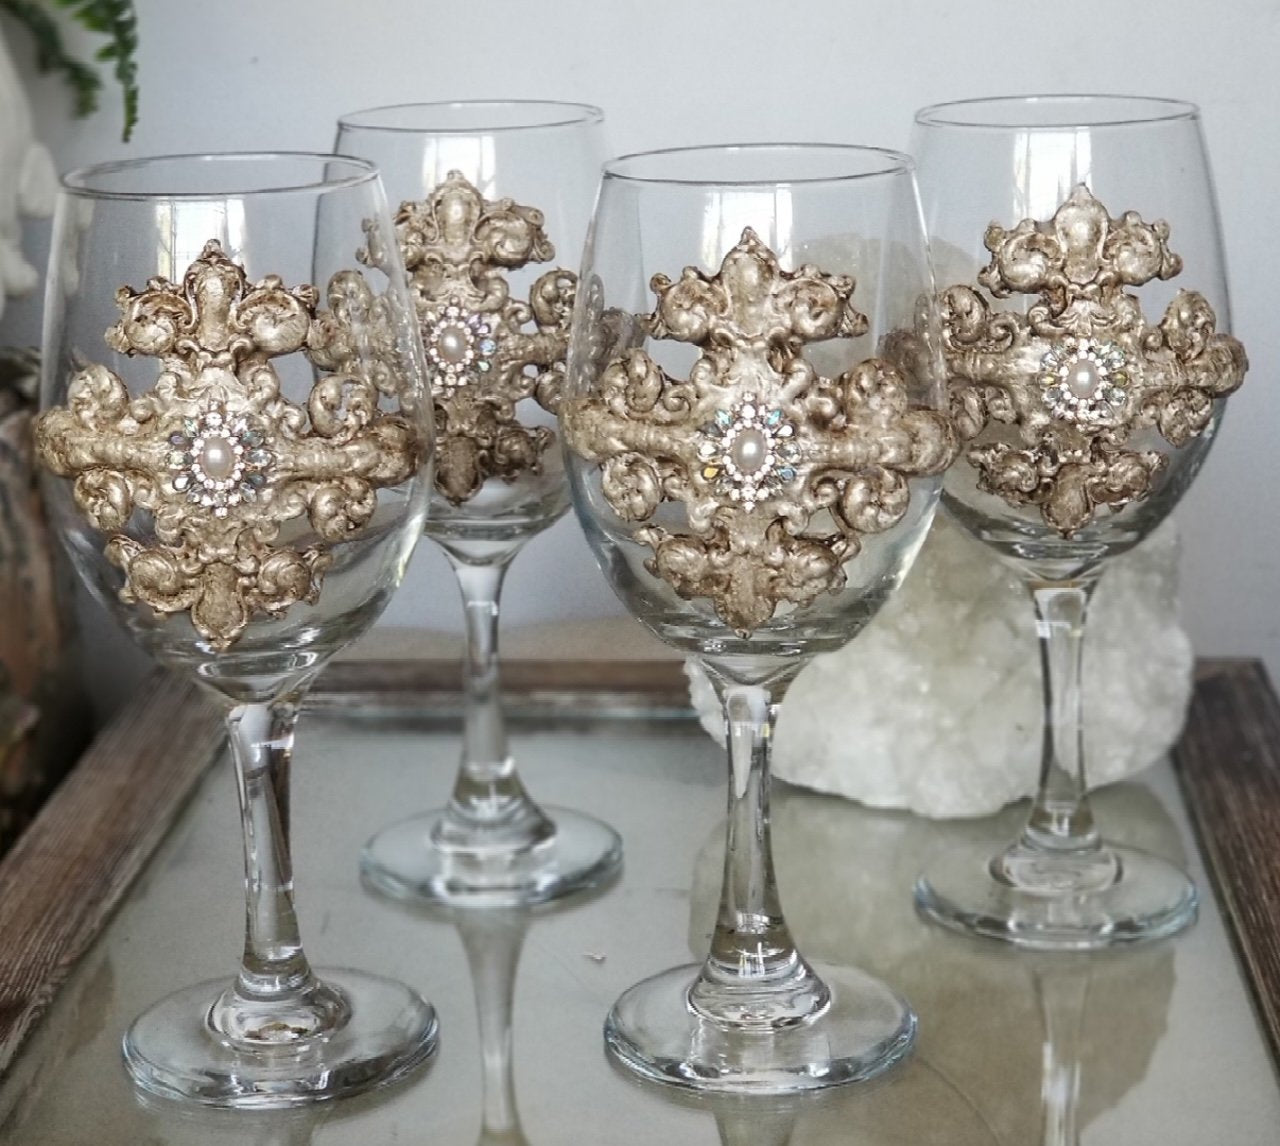 https://reilly-chanceliving.com/cdn/shop/products/Michelle_Butler_wine_glasses-old_world_wine_glasses-embellished_wine_glasses-reilly_chance.jpg?v=1628465063